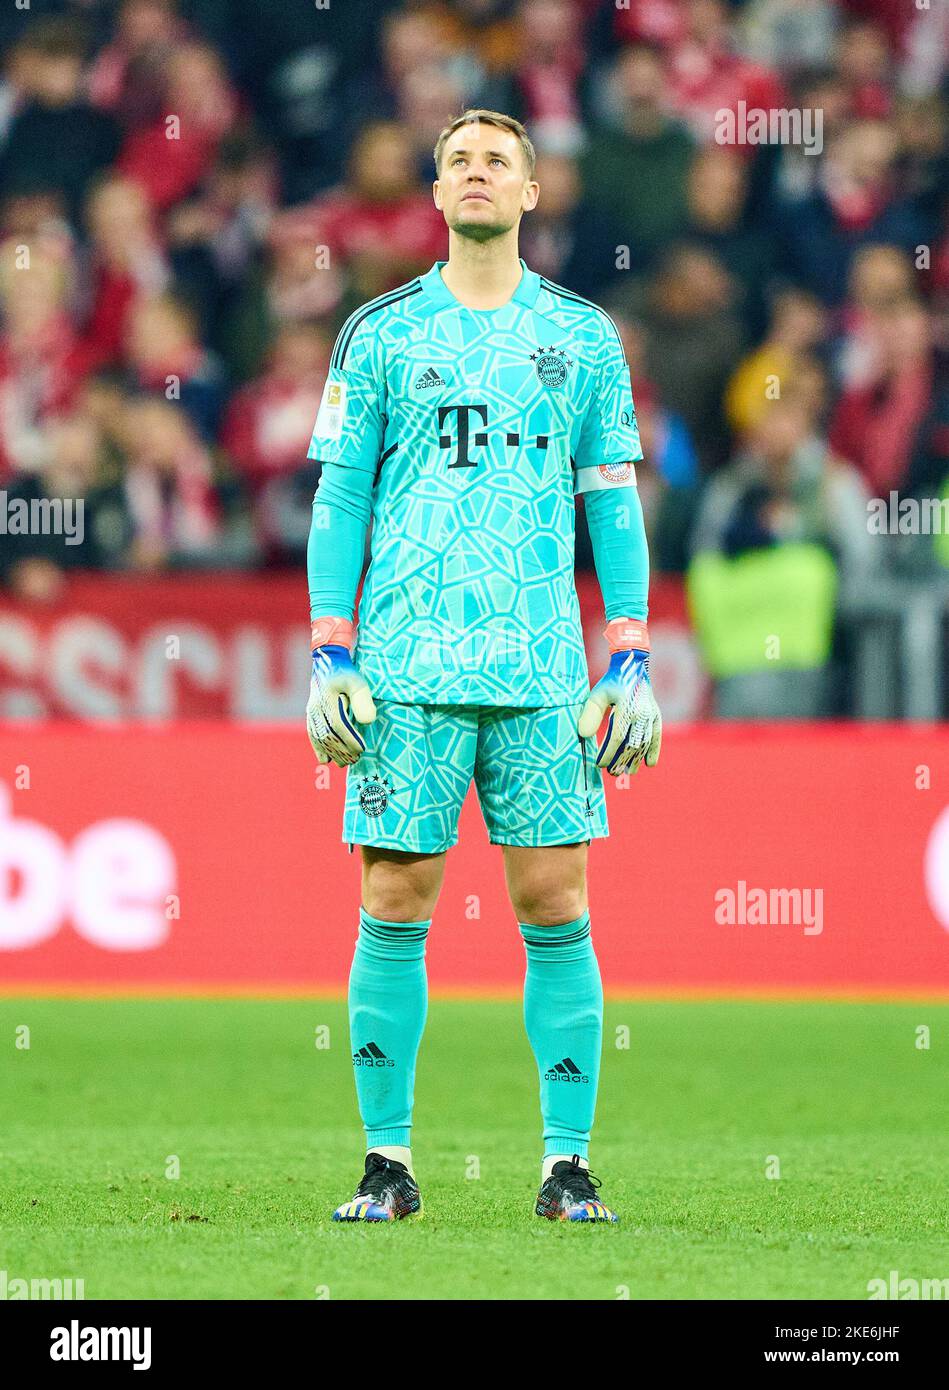 Manuel NEUER, goalkeeper FCB 1  in the match FC BAYERN MÜNCHEN - SV WERDER BREMEN 6-1 1.German Football League on Nov 8, 2022 in Munich, Germany. Season 2022/2023, matchday 14, 1.Bundesliga, FCB, München, 14.Spieltag © Peter Schatz / Alamy Live News    - DFL REGULATIONS PROHIBIT ANY USE OF PHOTOGRAPHS as IMAGE SEQUENCES and/or QUASI-VIDEO - Stock Photo